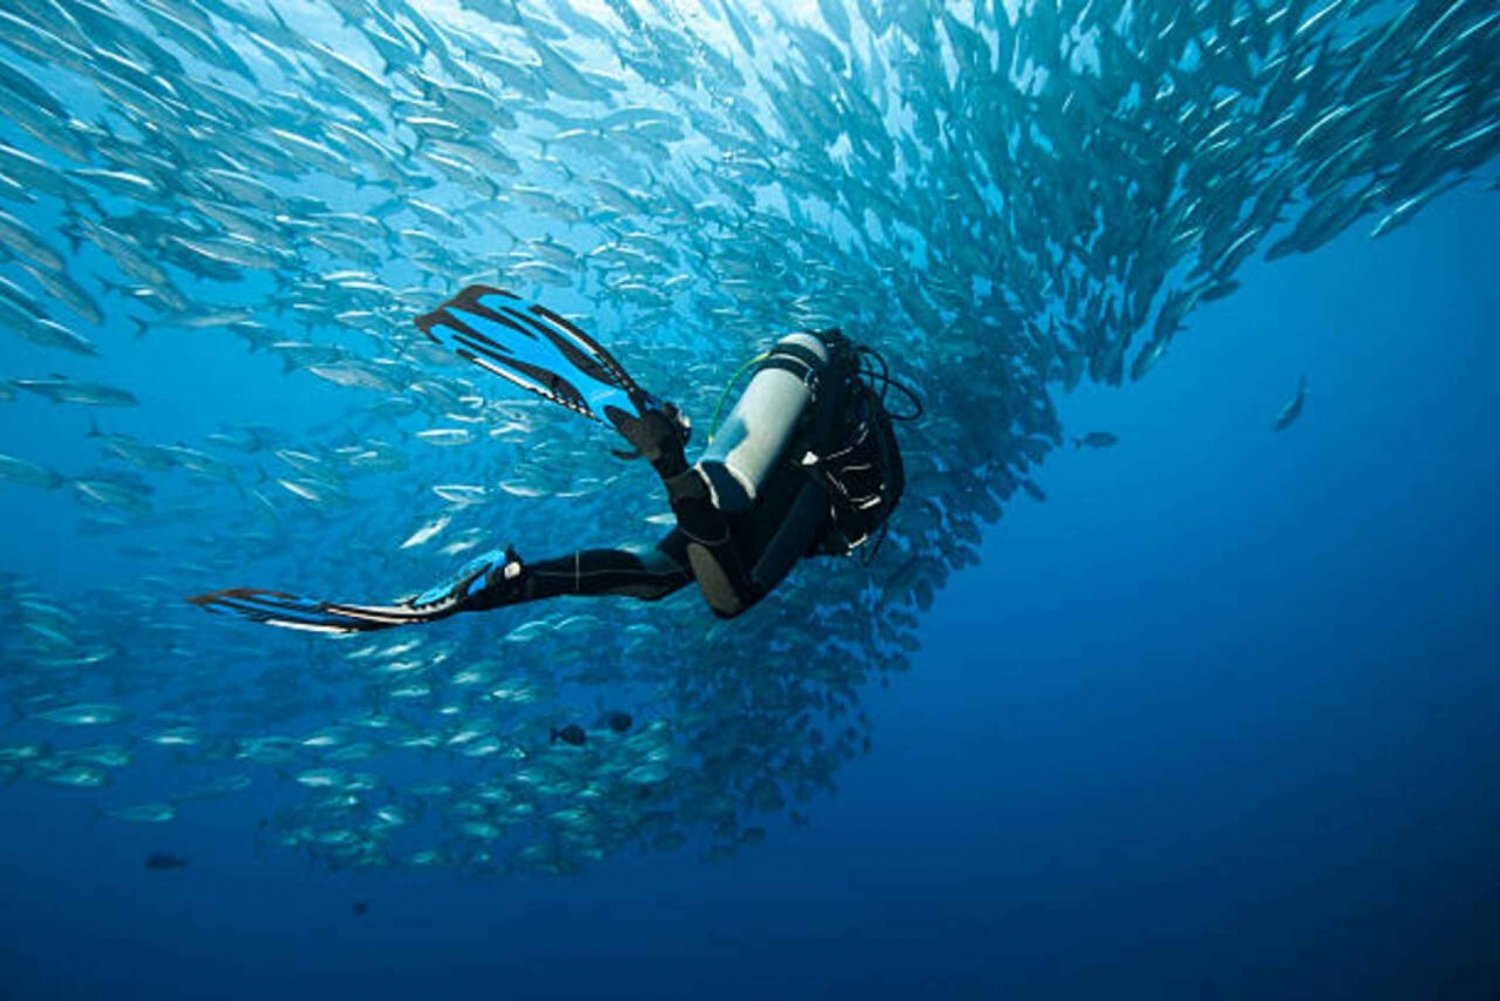 Sharm El Sheikh: 4-Day PADI Open Water Diver Course